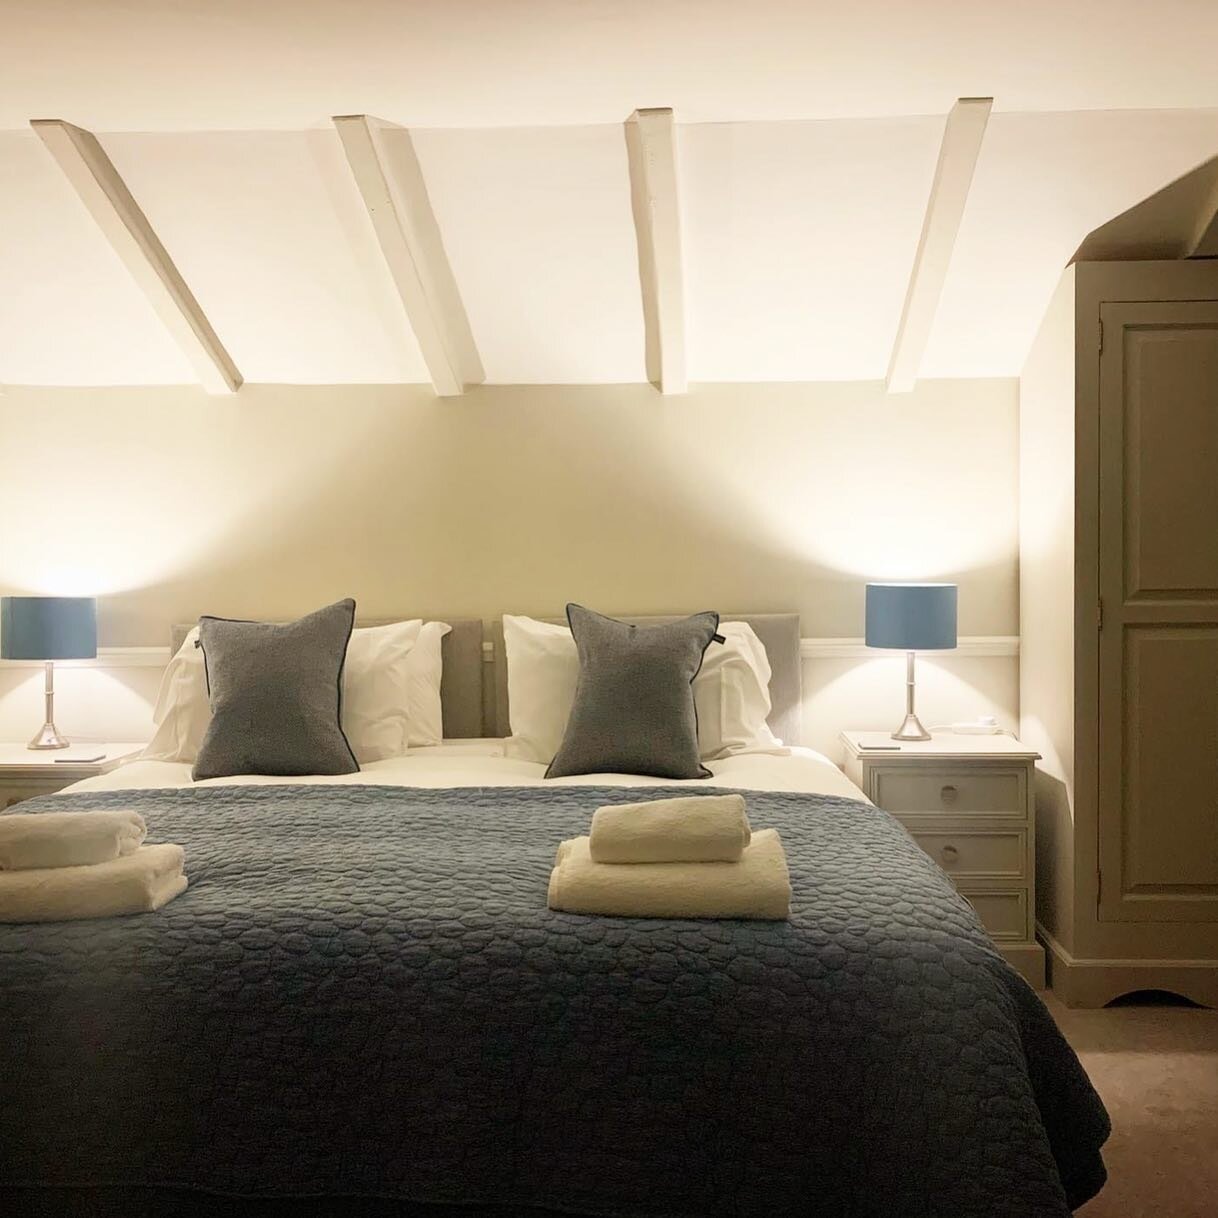 Stay with us... 💤 We have 6 beautifully refurbished rooms here at The Boot &amp; Shoe Inn, which can all be located on Booking.com. 

Make the most of your visit and check-in with us! 

www.thebootandshoeinn.co.uk

#thebootandshoeinn #flintham #coun